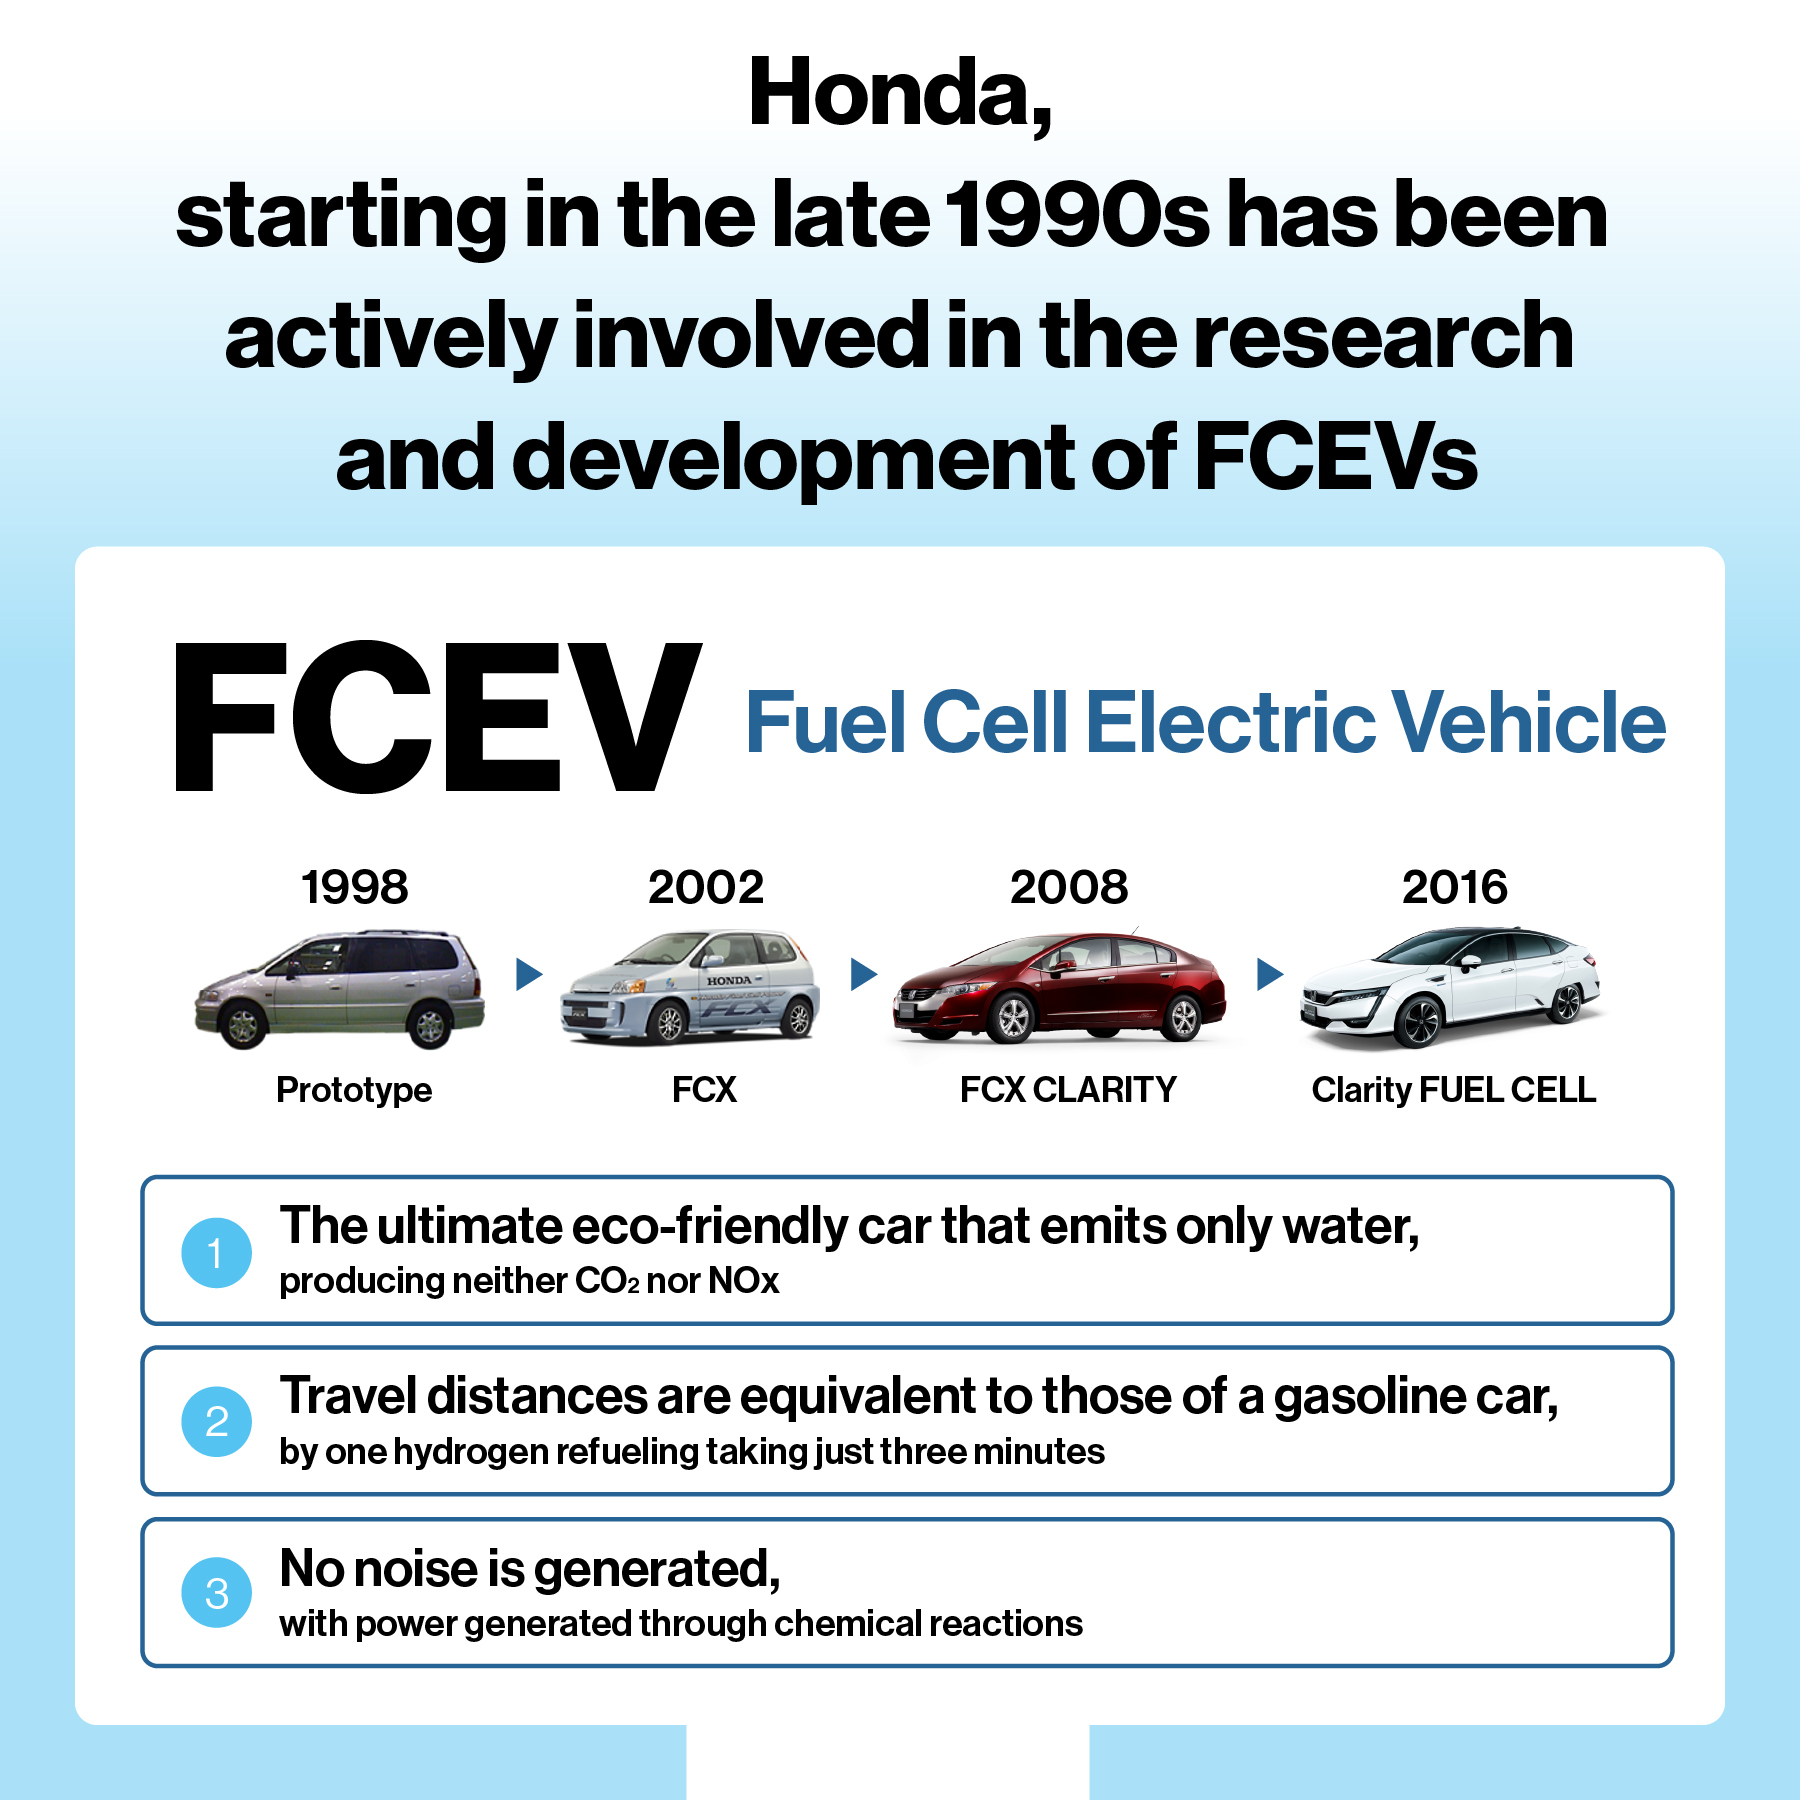 Honda has been working on the research and development of FCEVs since the late 1990s